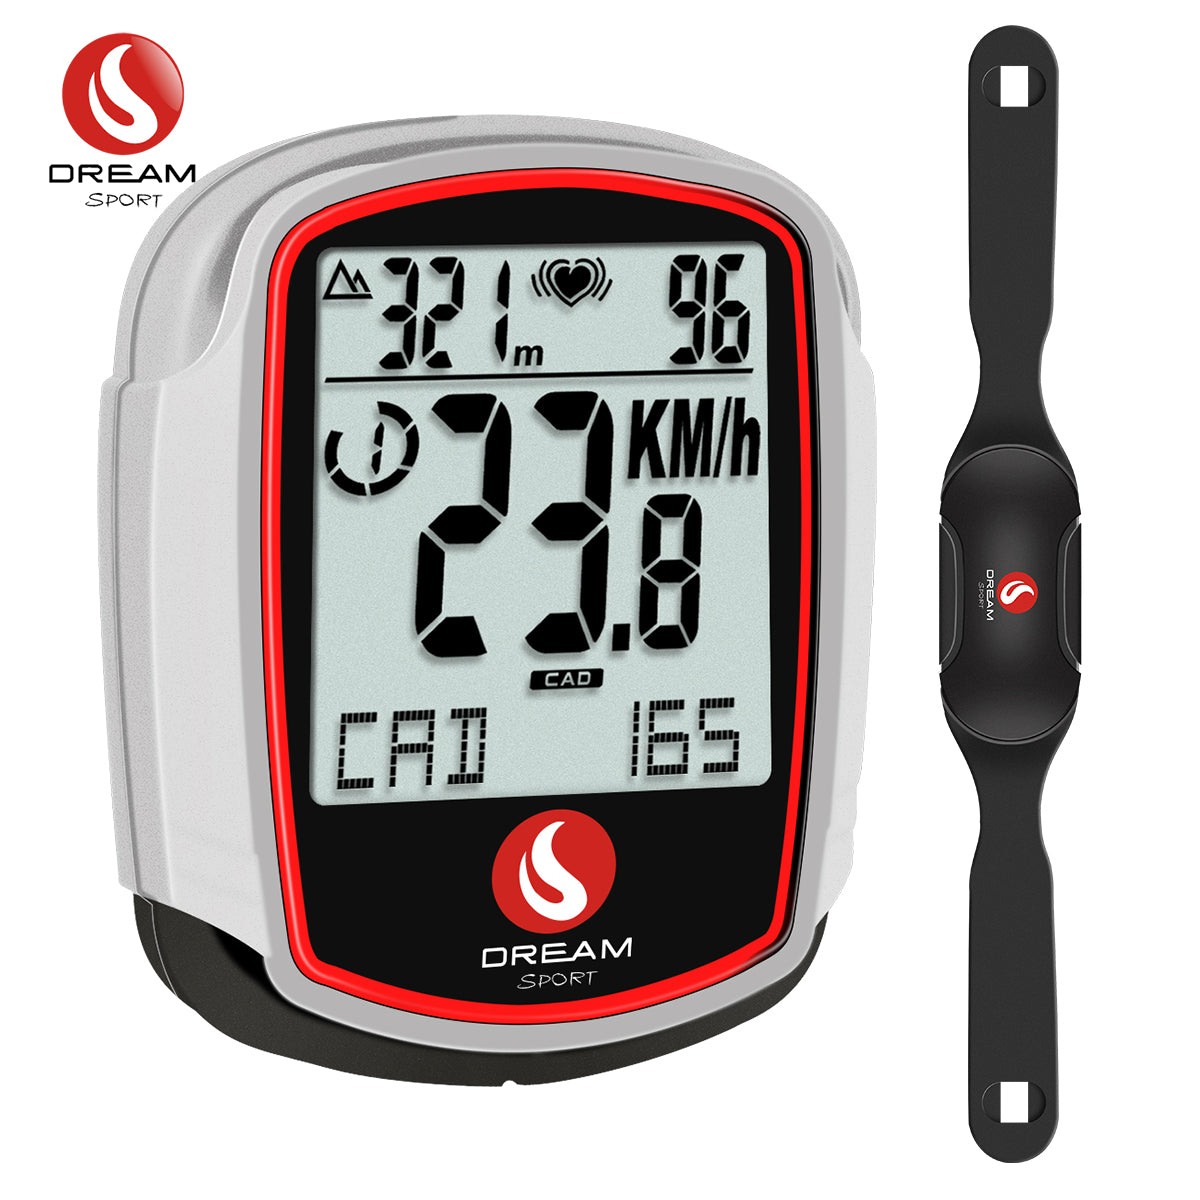 DREAM SPORT DCY438 Bike Computer Wireless With Heart Rate Monitor